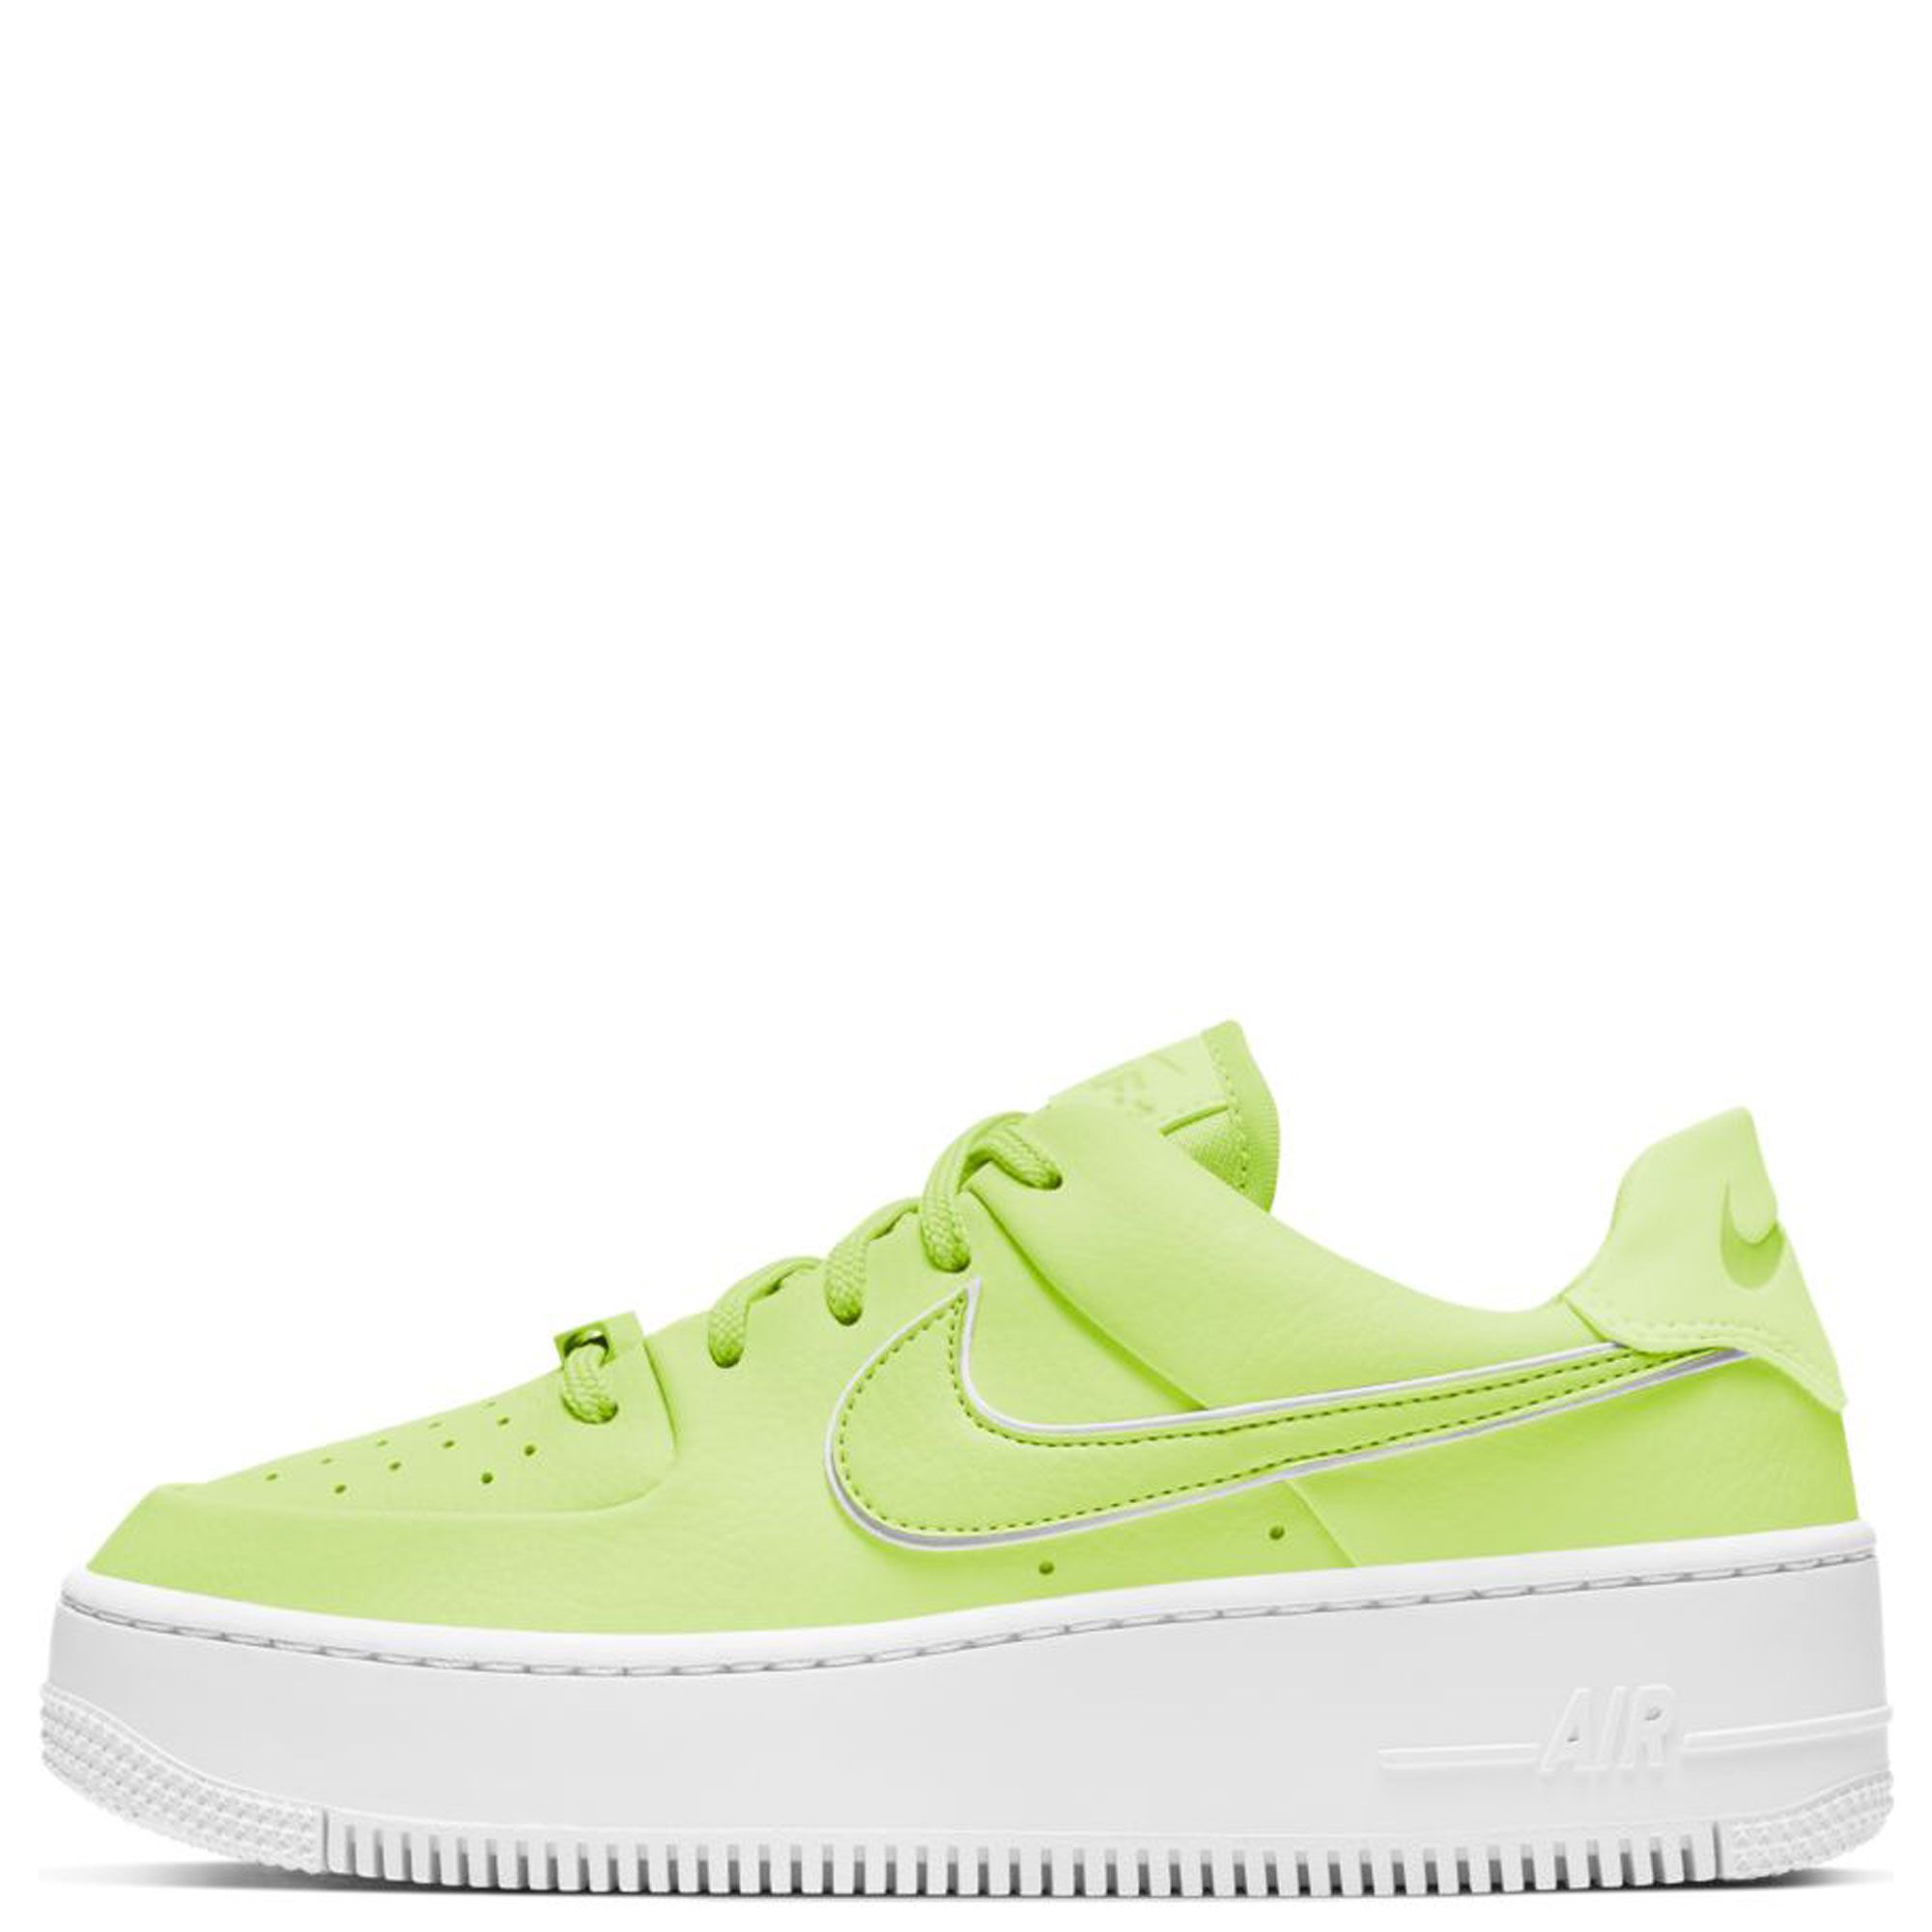 nike air force 1 sage low size 6